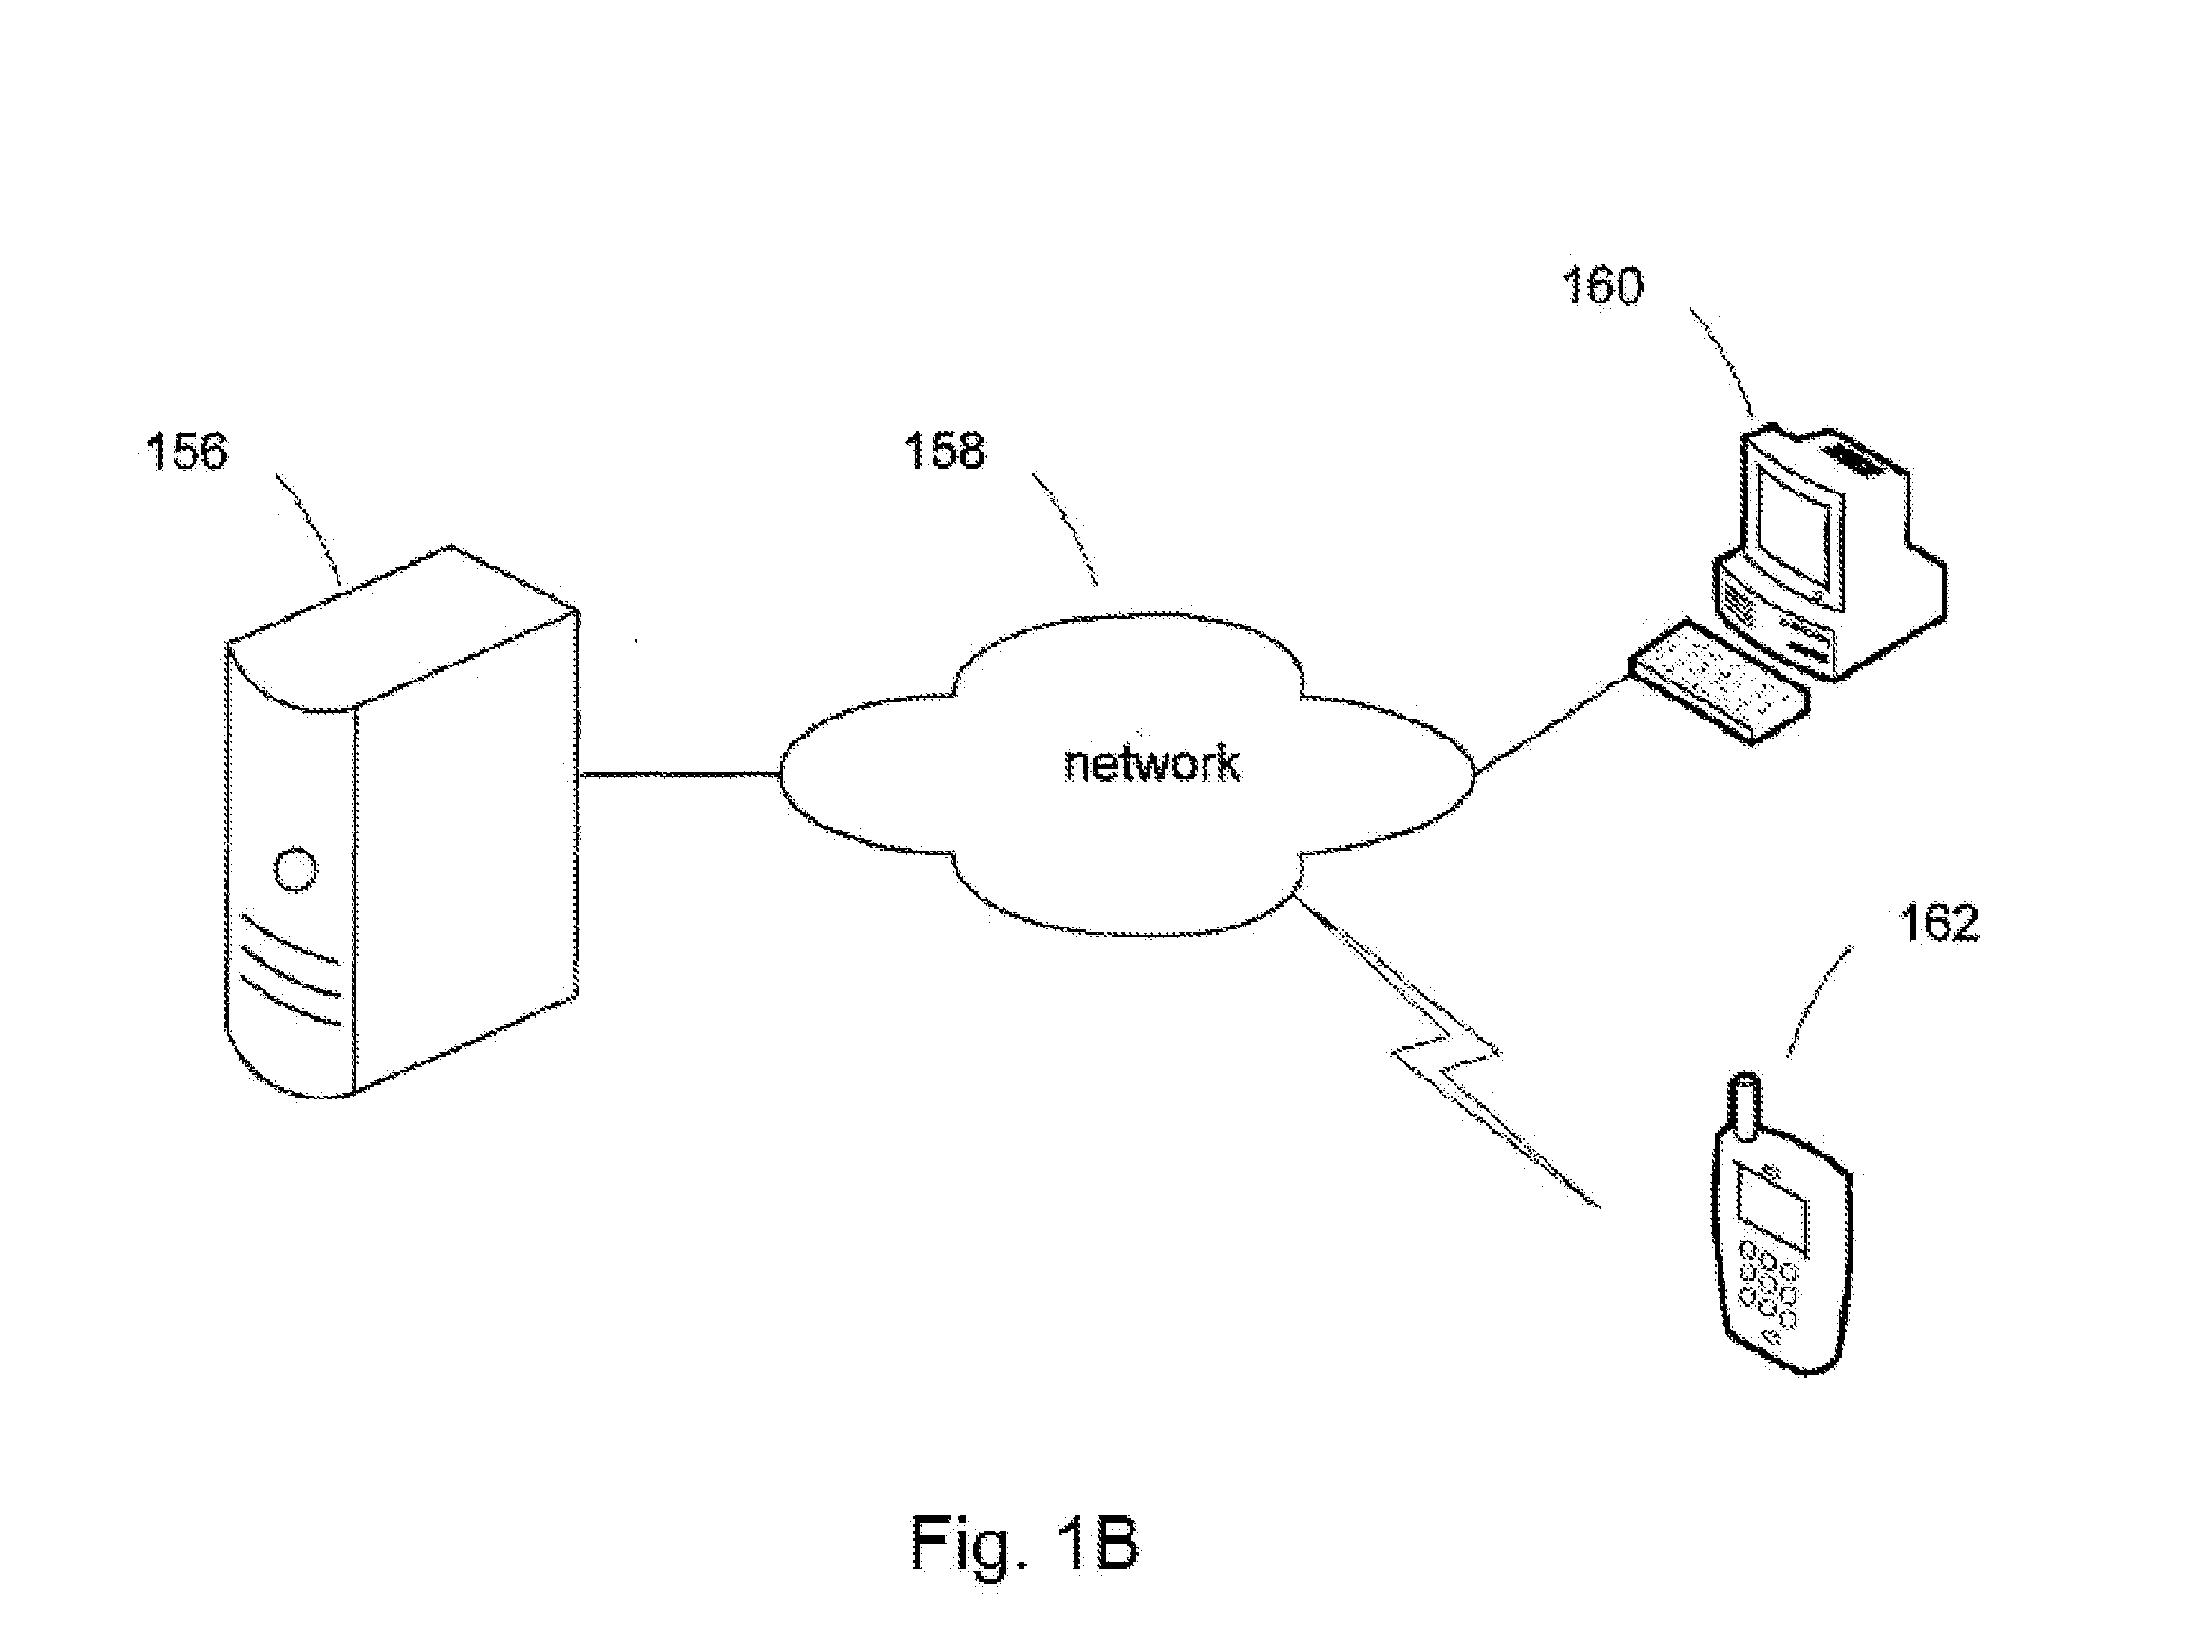 Method of instruction location randomization (ILR) and related system